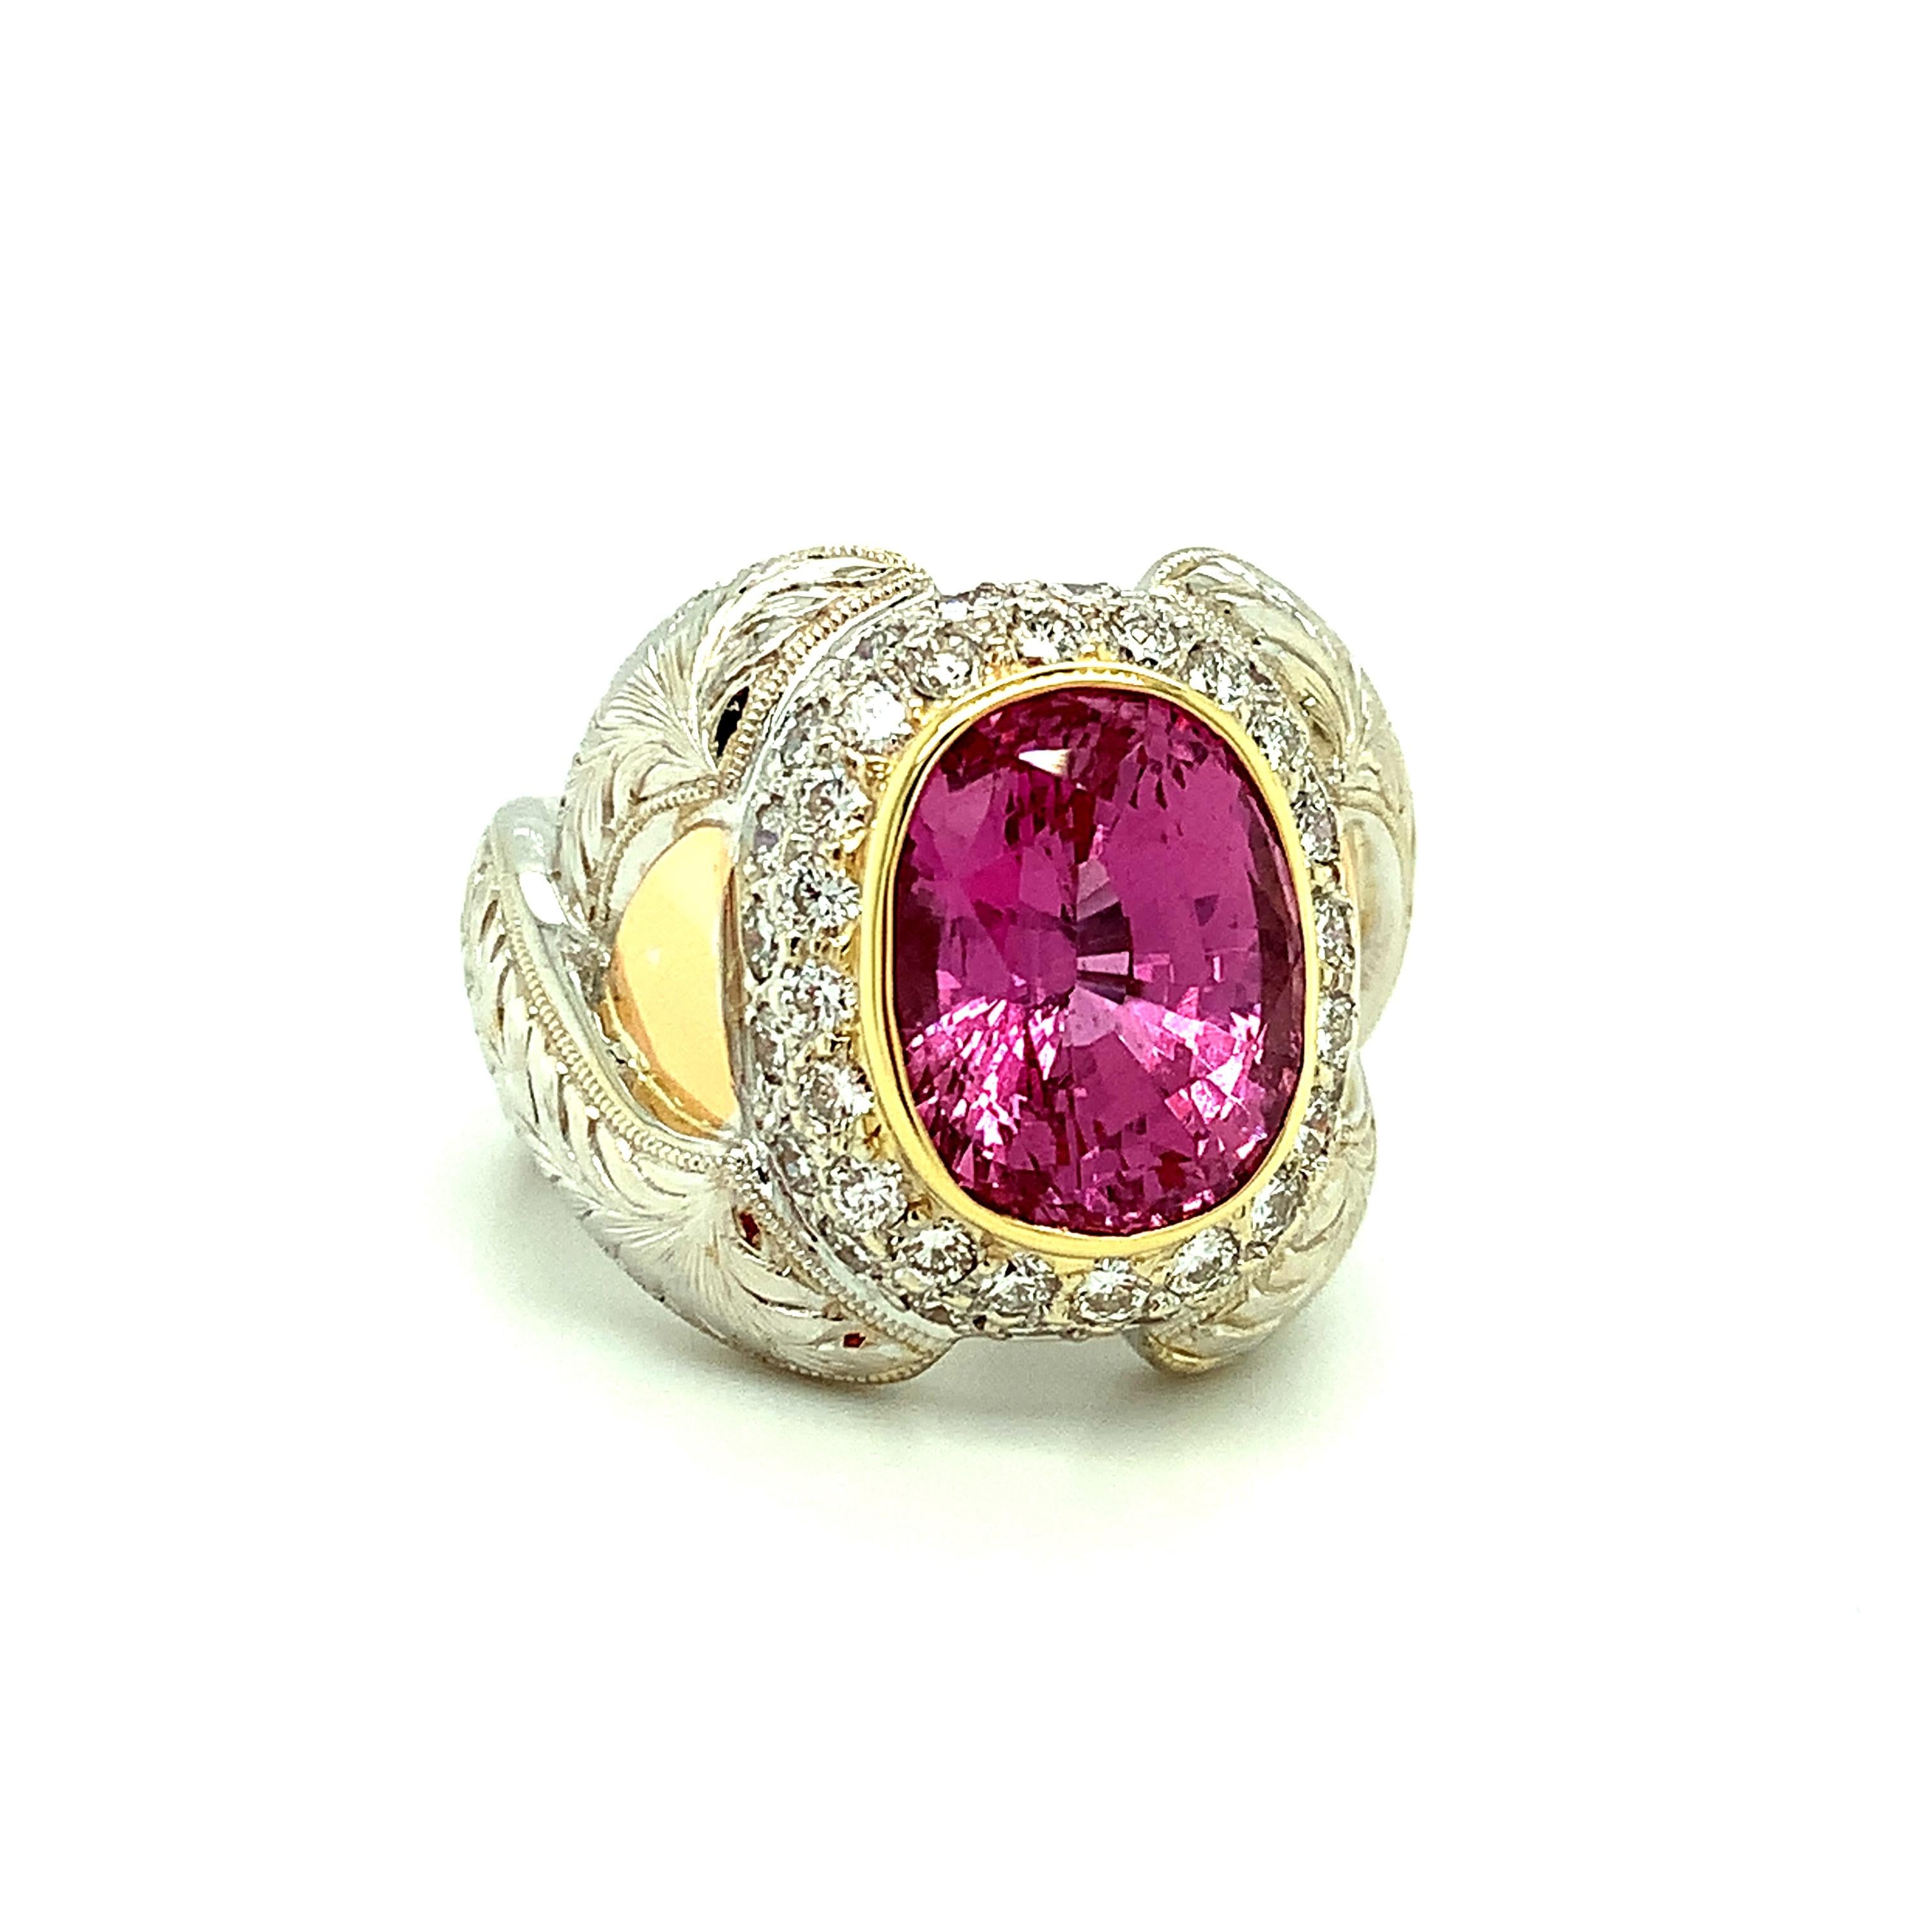 Artisan GIA Certified 7.08 Carat Pink Sapphire and Diamond Cocktail Ring in 18k Gold For Sale